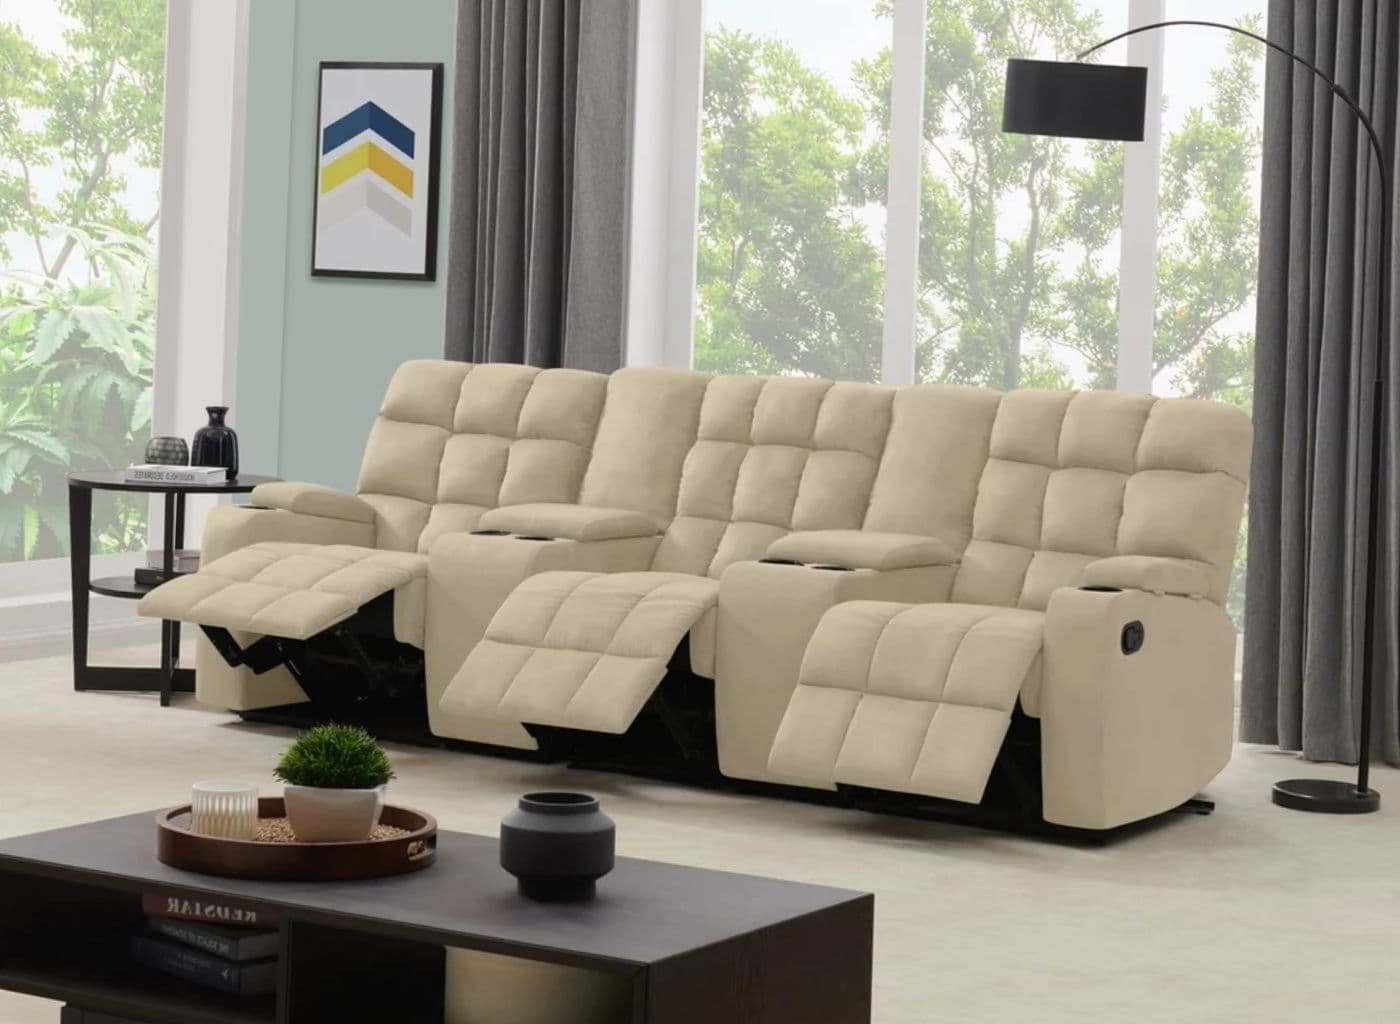 3-seat Recliner Sofa with Storage